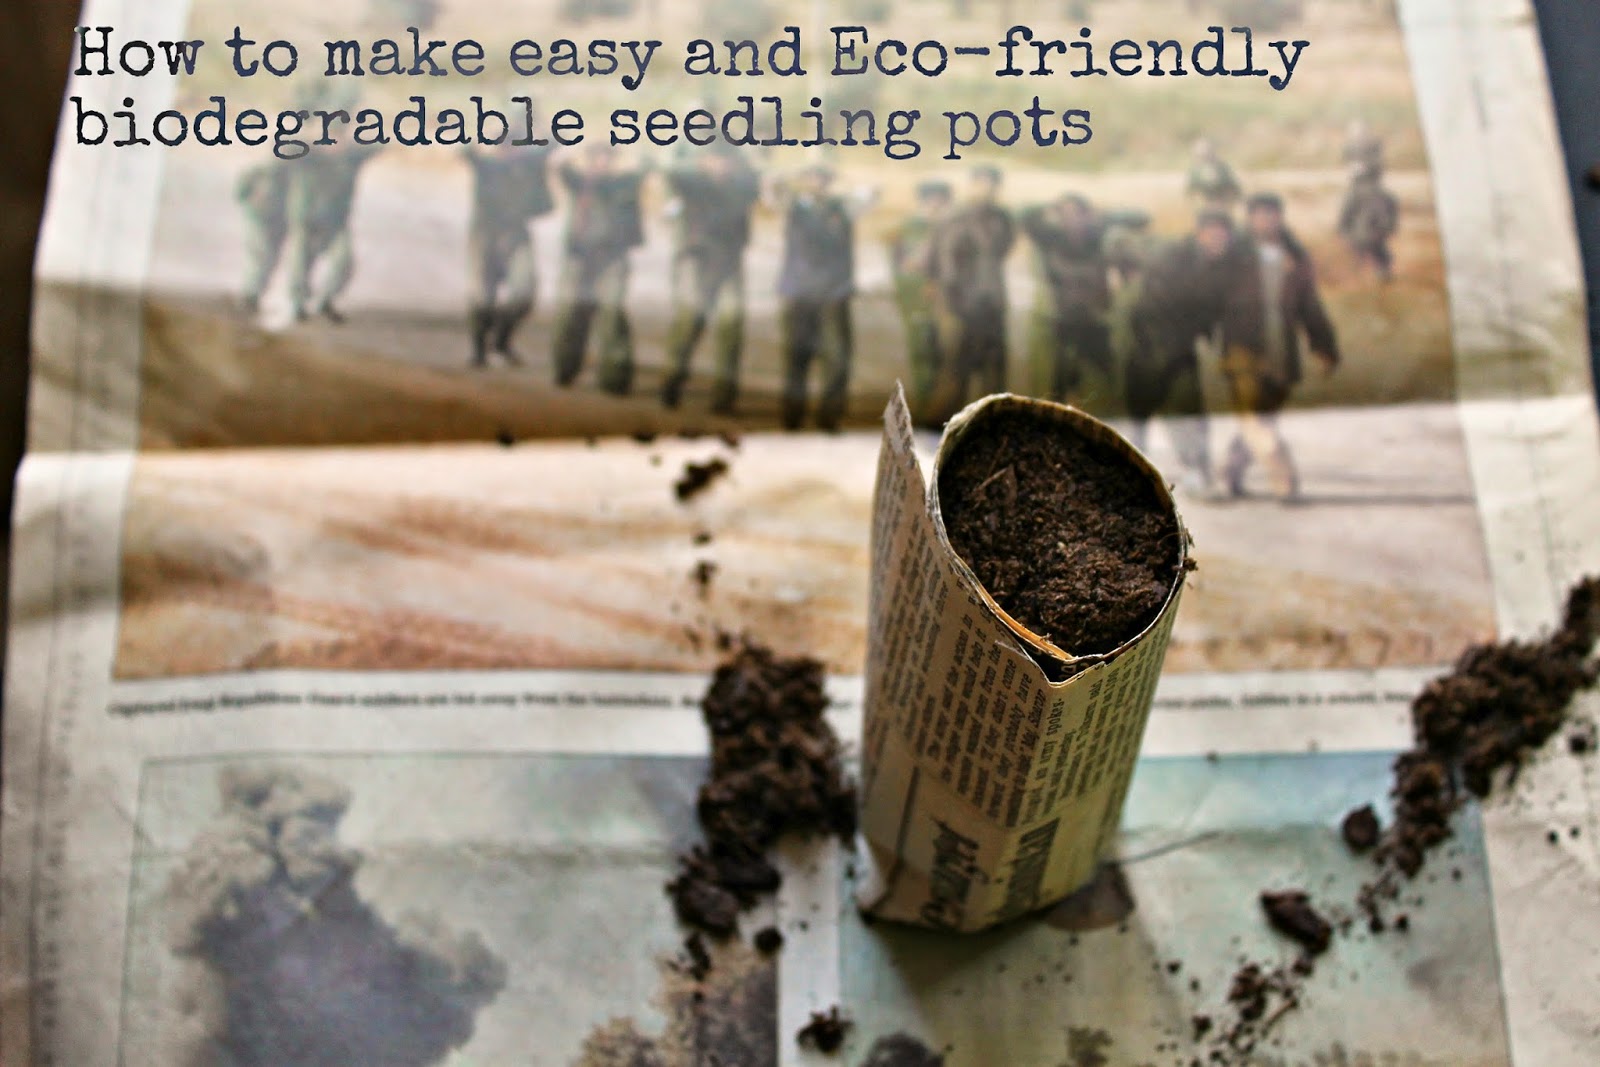 How to make Biodegradable Seed Pots with Newspaper